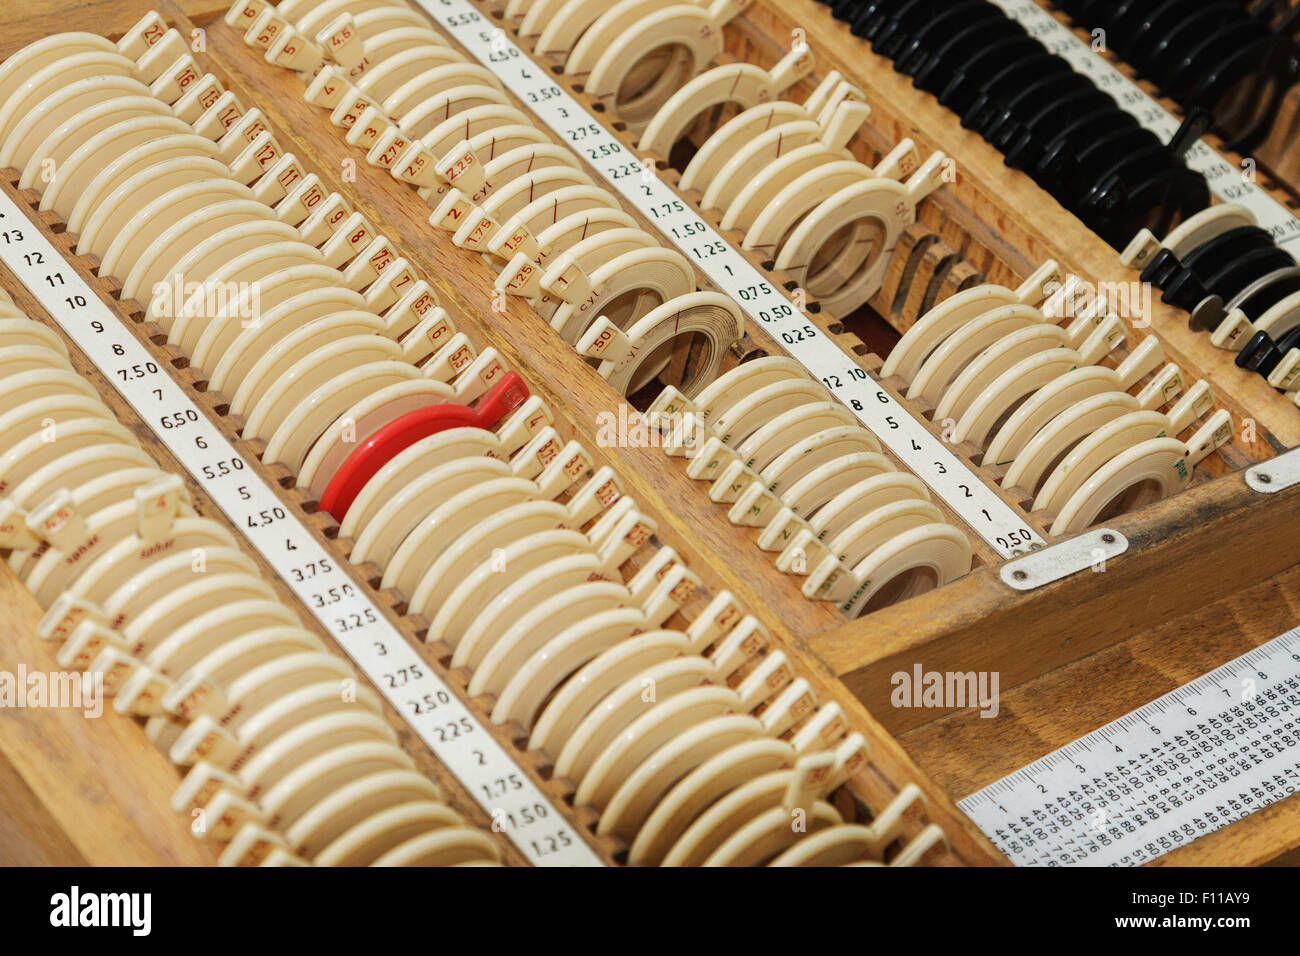 optician with set of trial frames and trial lenses Stock Photo